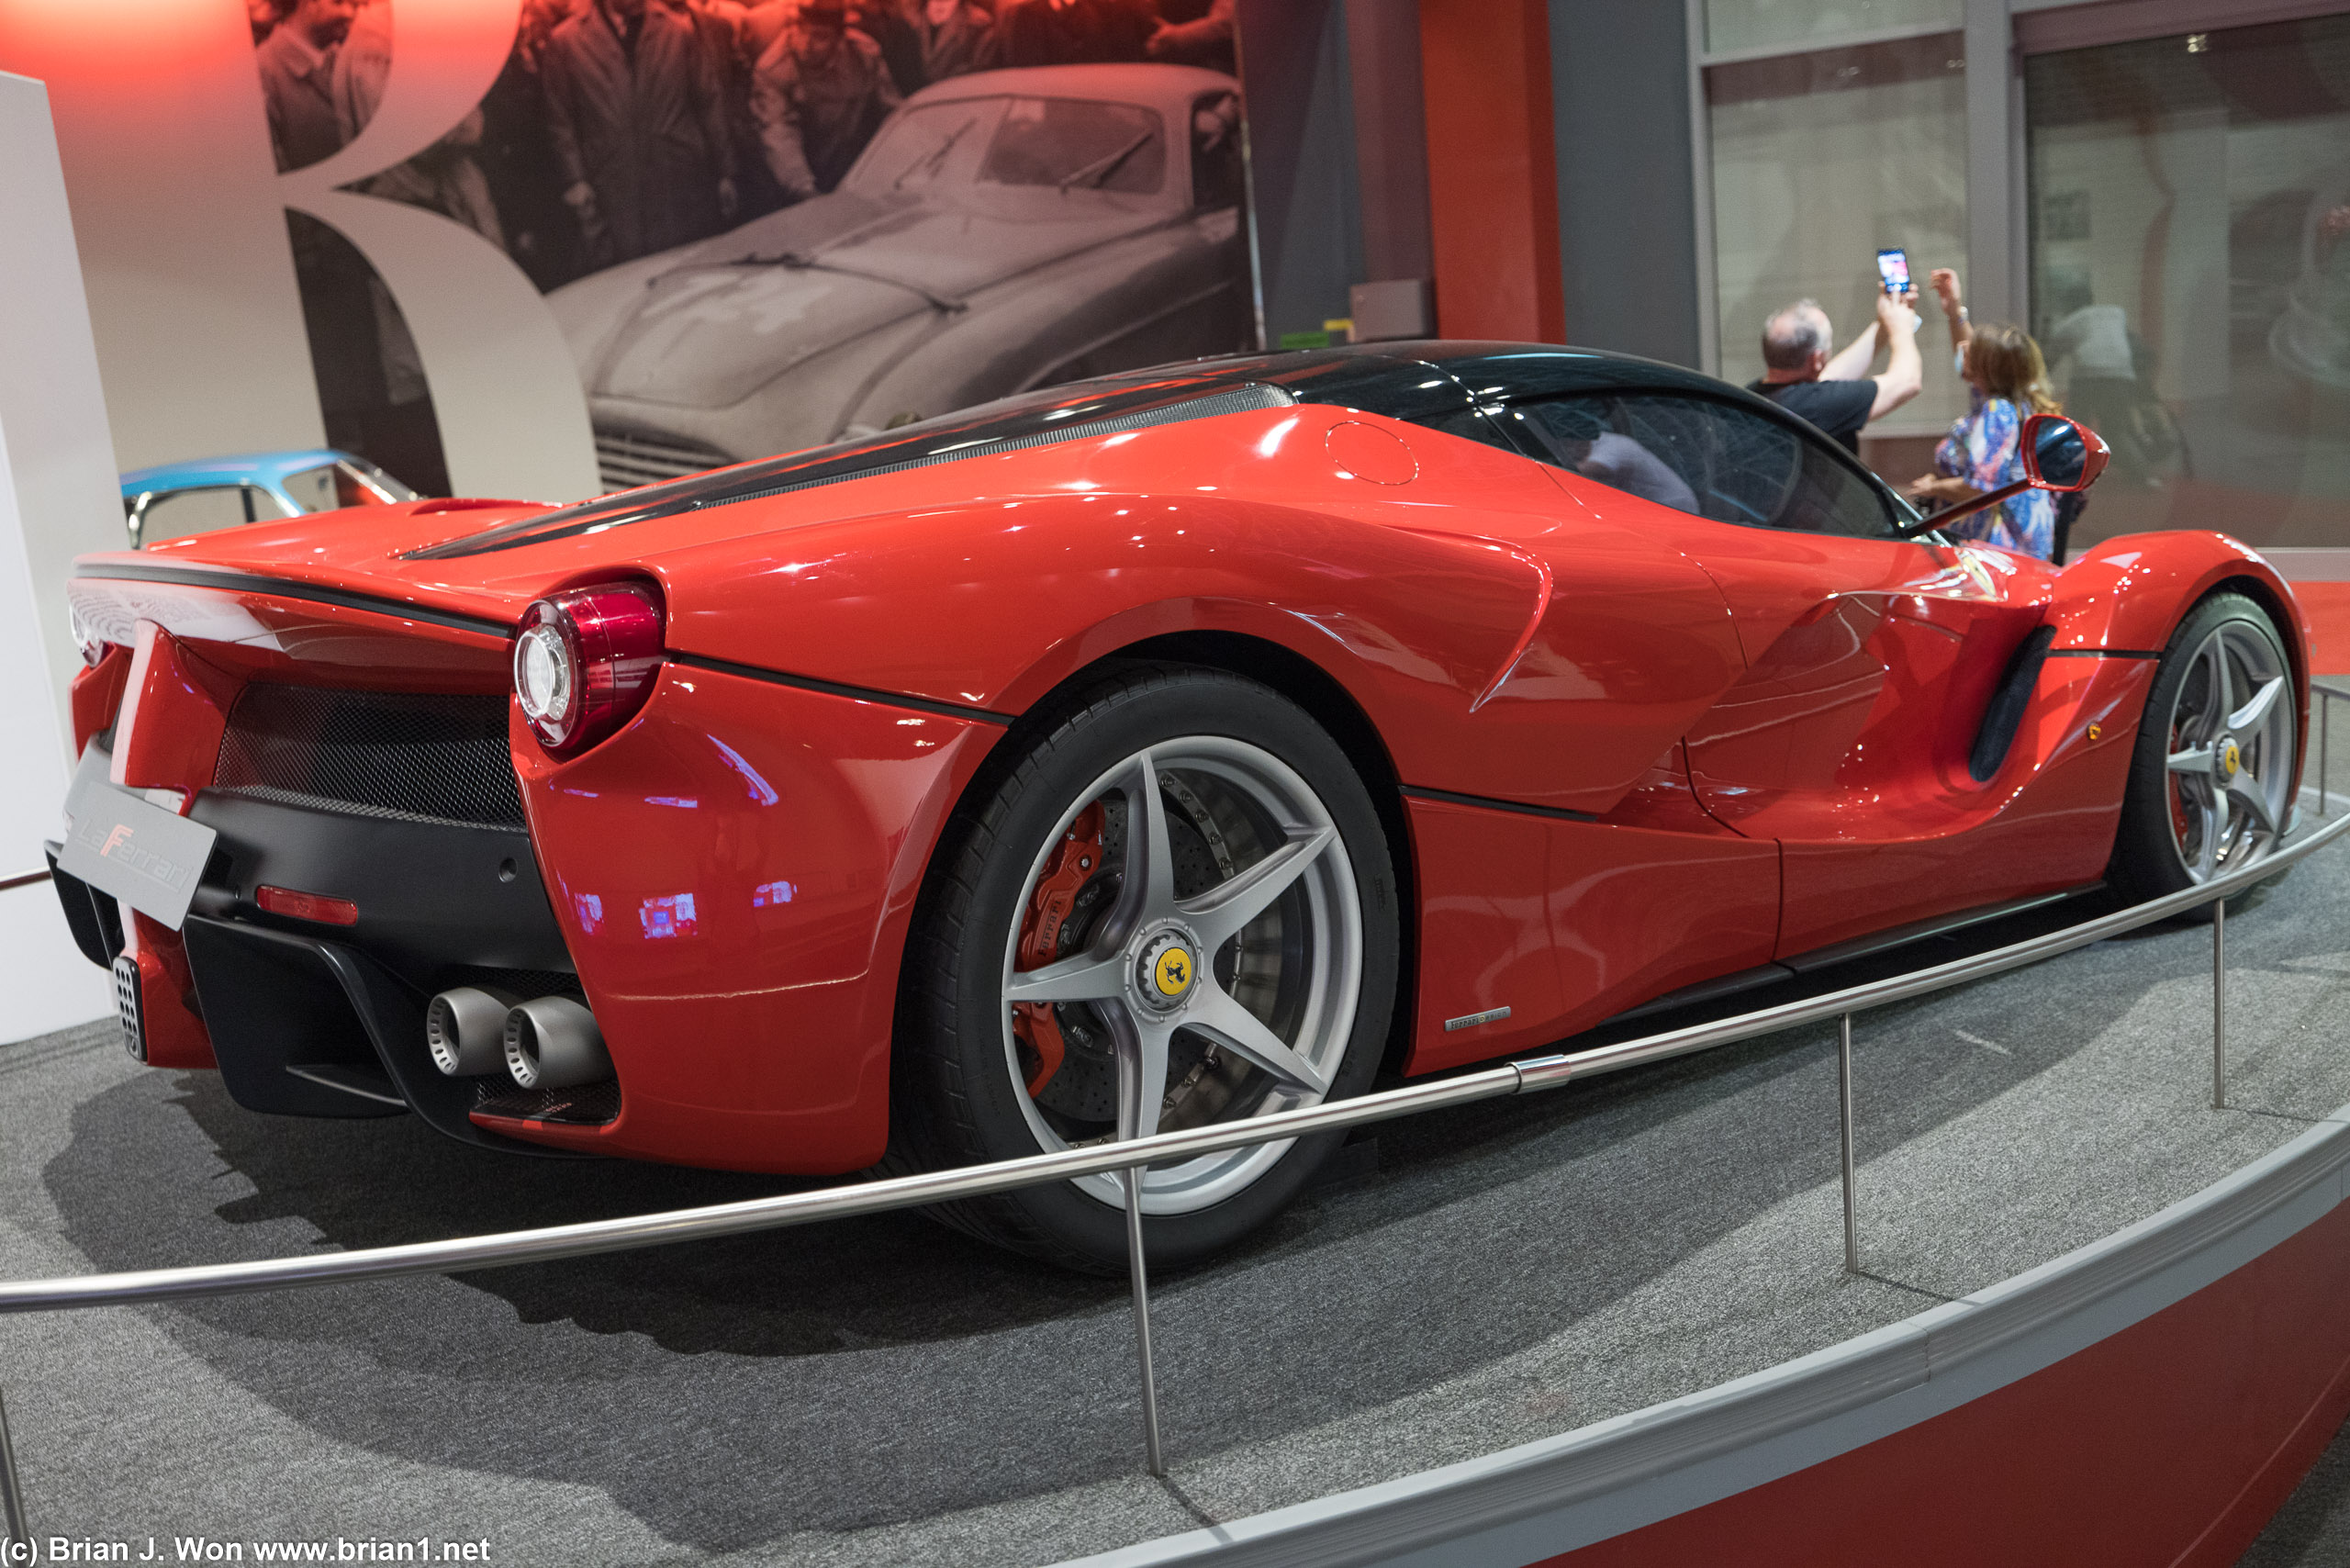 Ferrari La Ferrari. Hard to believe that just 8 years later this is now pretty tame by supercar standards.